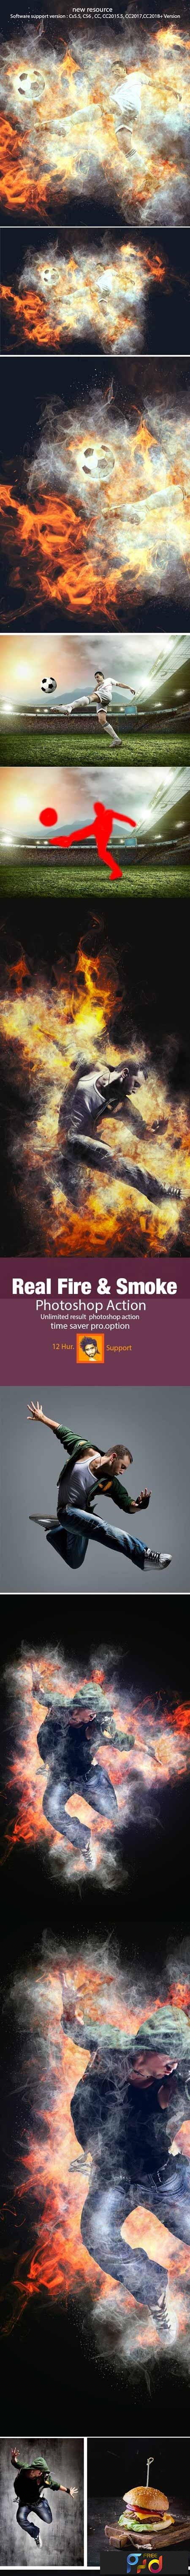 Real Fire & Smoke Photoshop Action